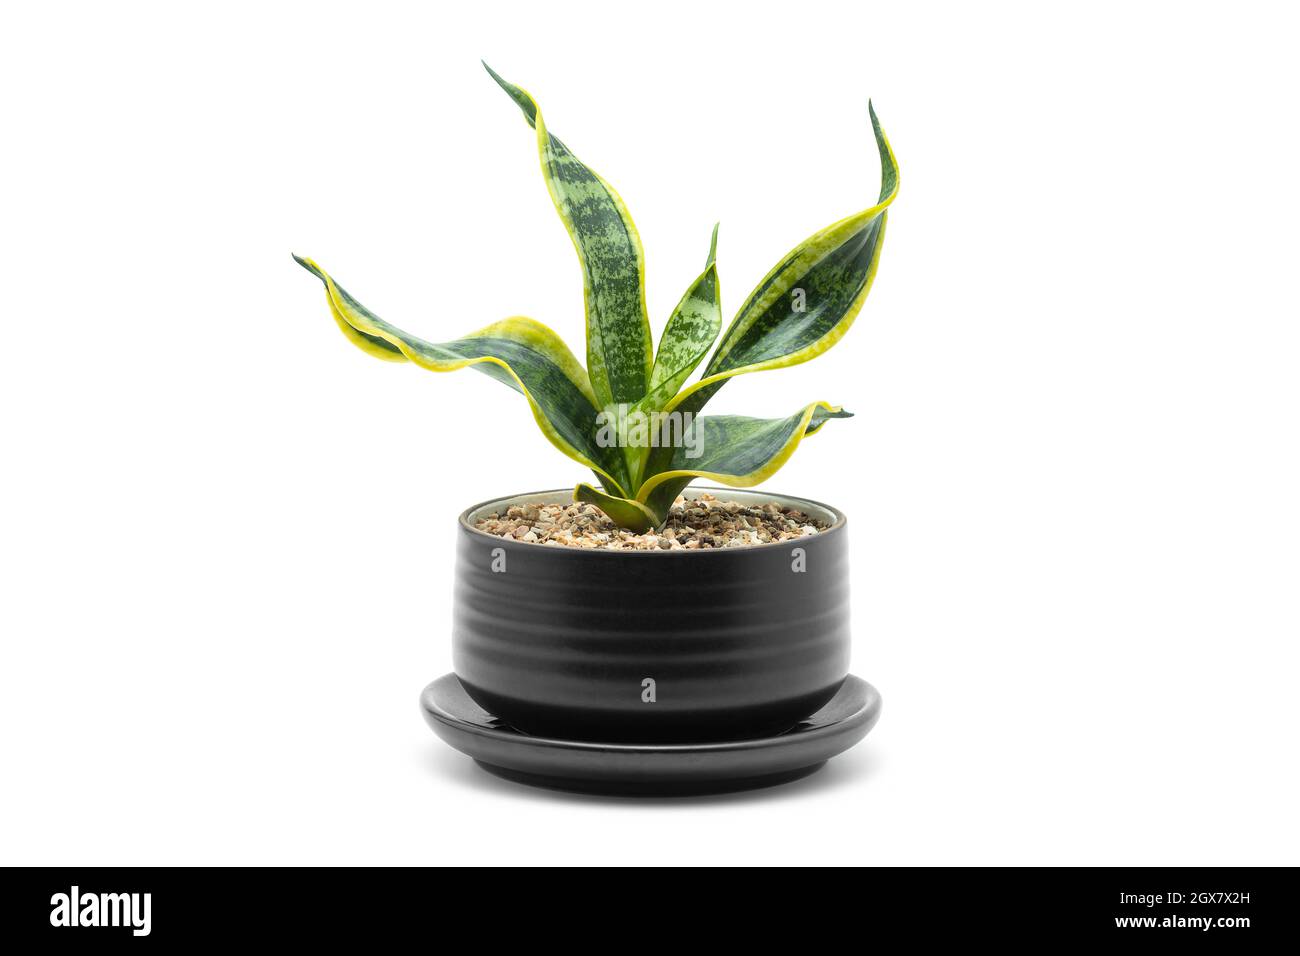 Houseplant. Snake Plant in a black ceramic potted plant on a white background. Stock Photo